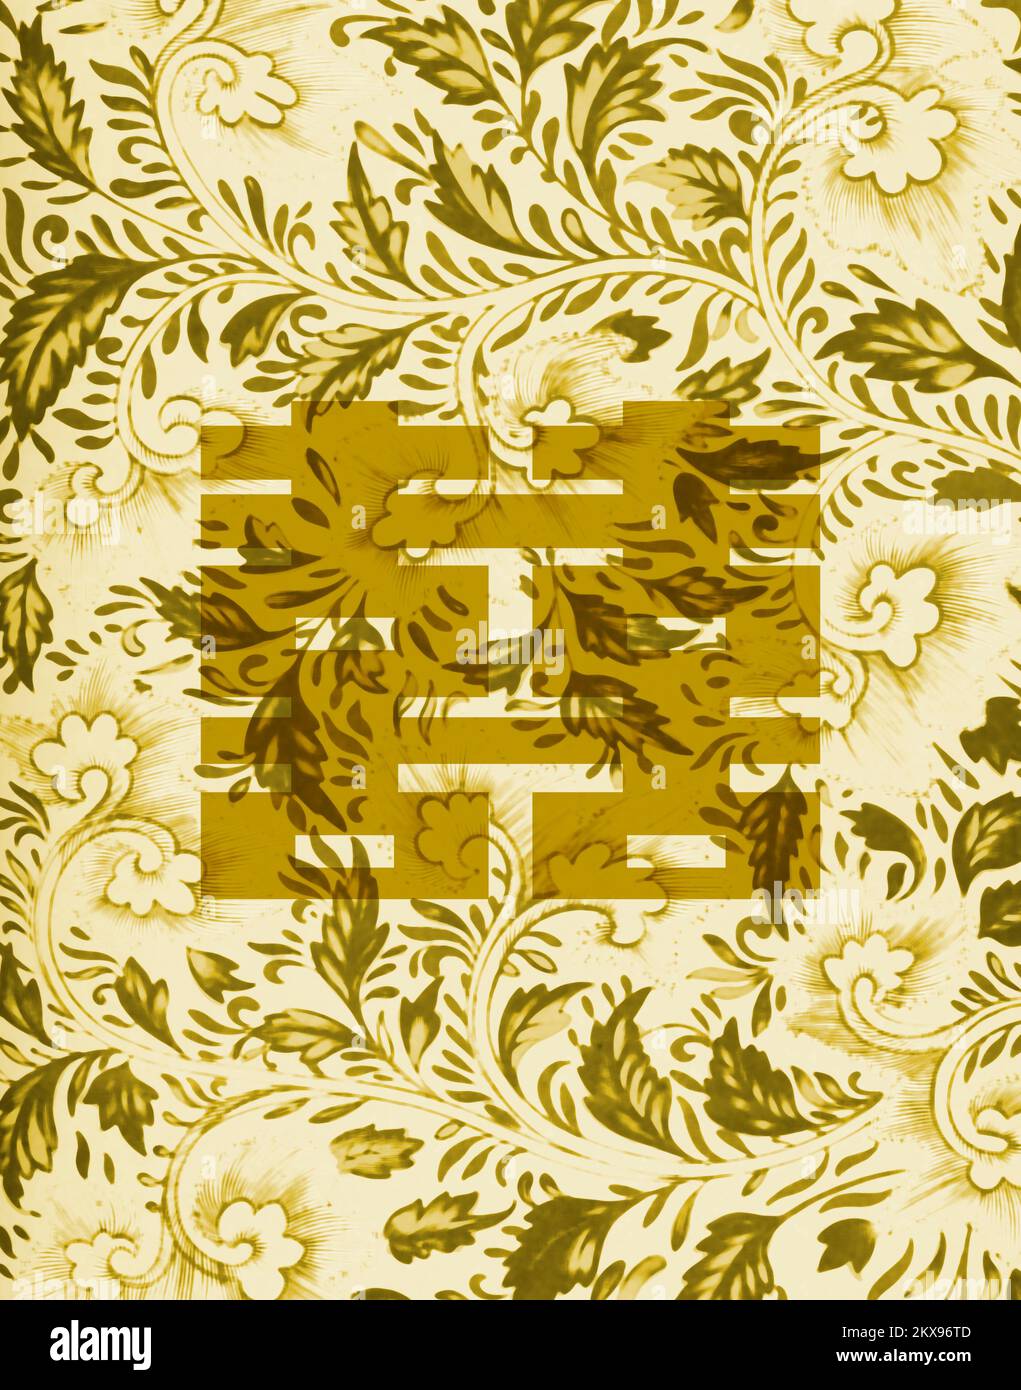 Feng shui double happiness symbol on vintage golden pattern wallpaper. Stock Photo